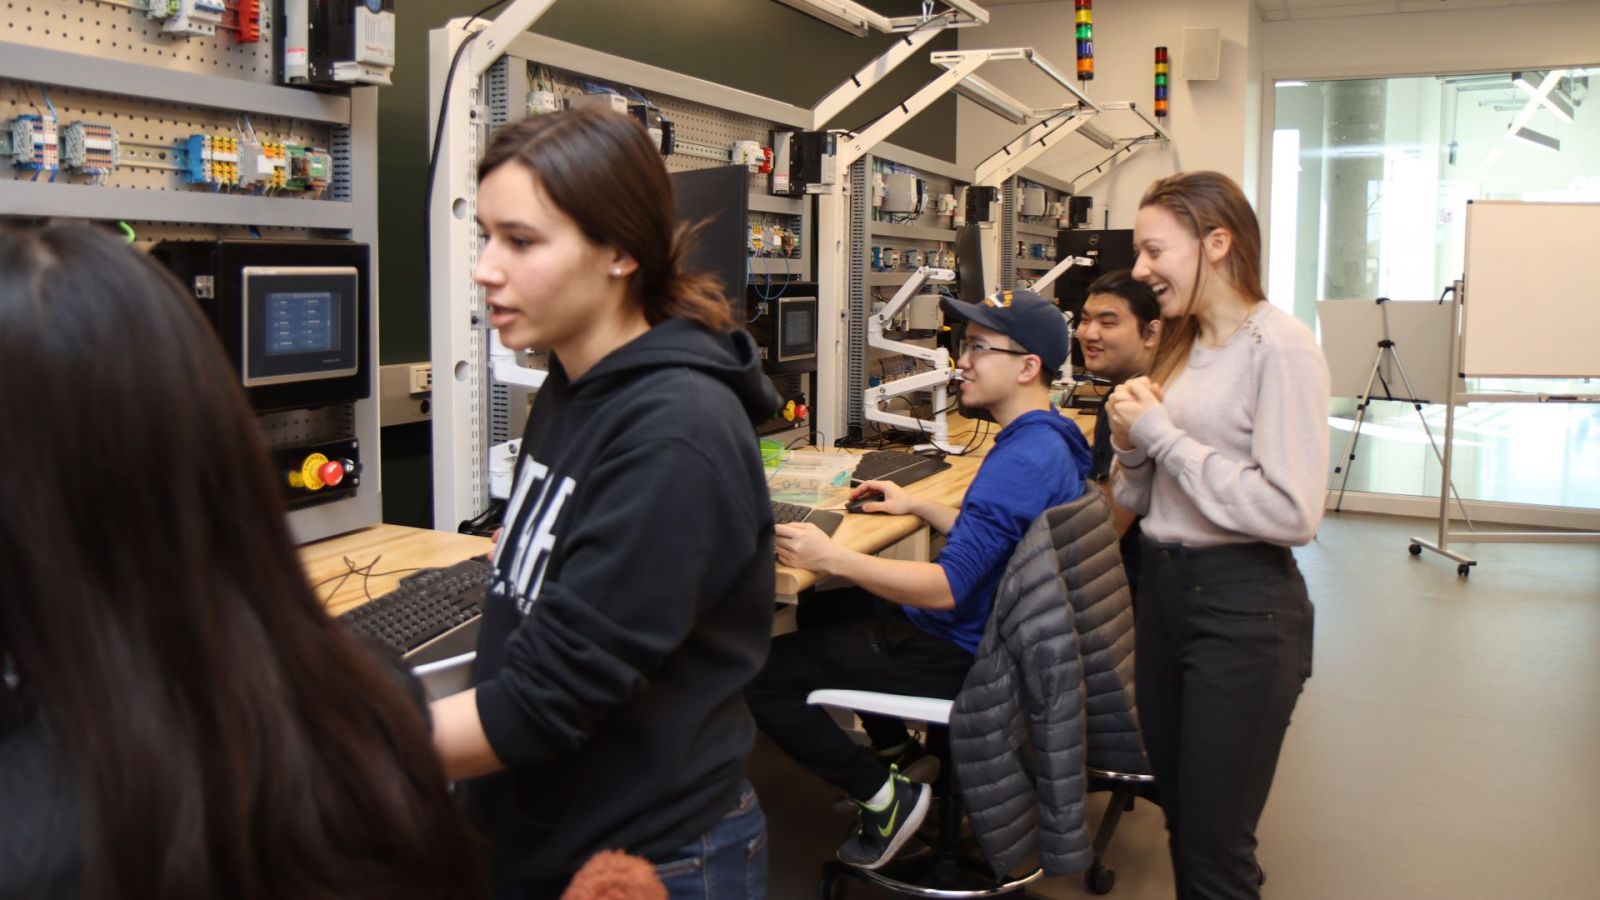 Students work in the Industrial IoT lab. (Purdue University photo/John O'Malley)